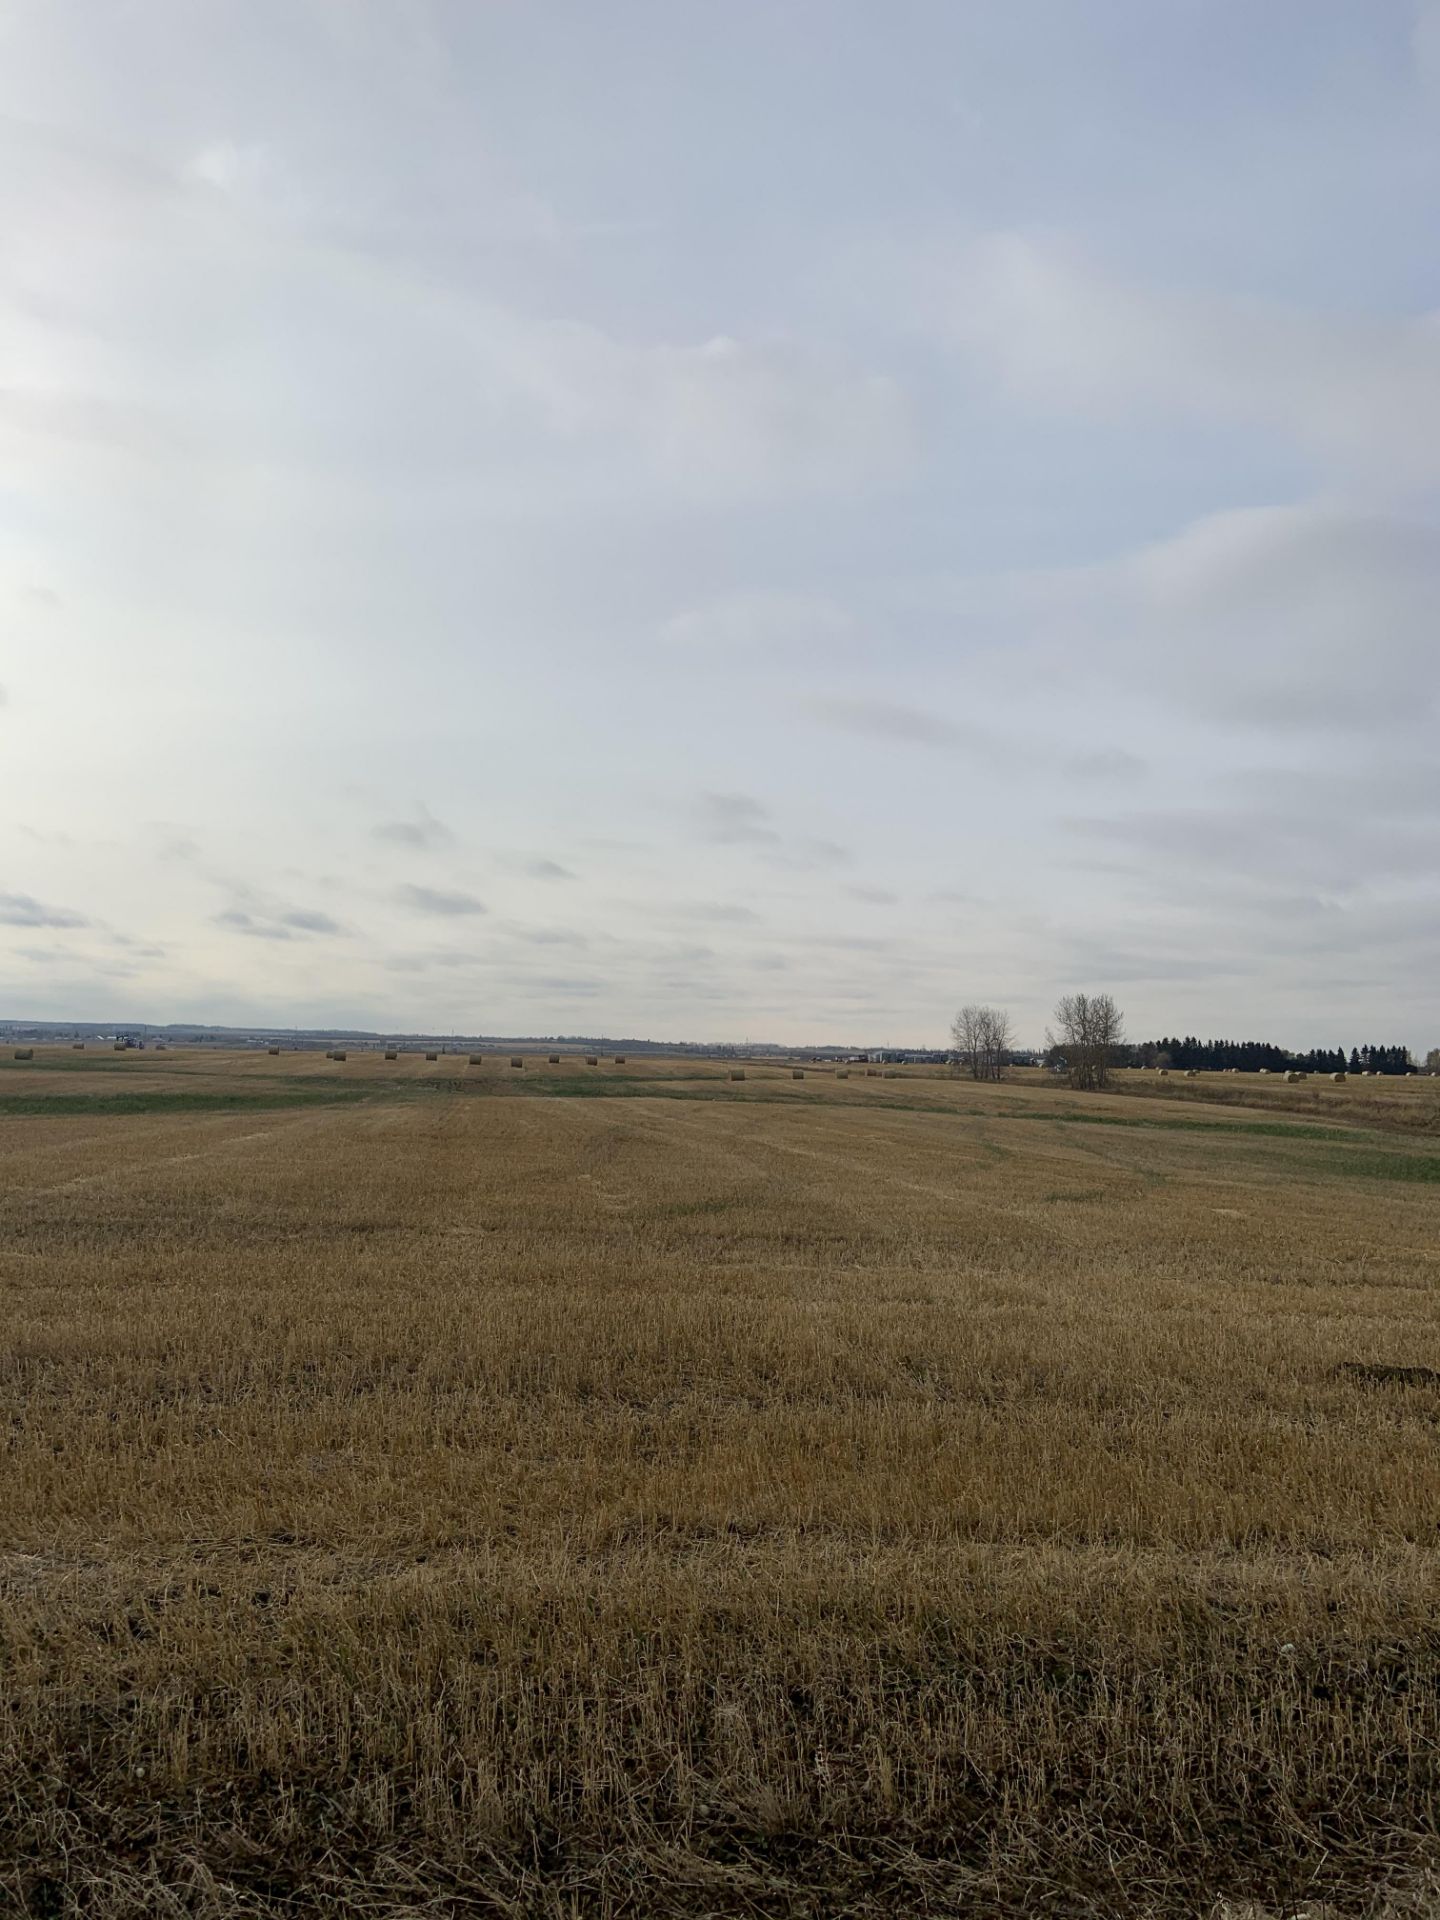 160+/- Total Acres NW 8-56-20-W4, Bruderheim, AB, consisting of Crop Land, Surface Lease & Yard Site - Image 27 of 34